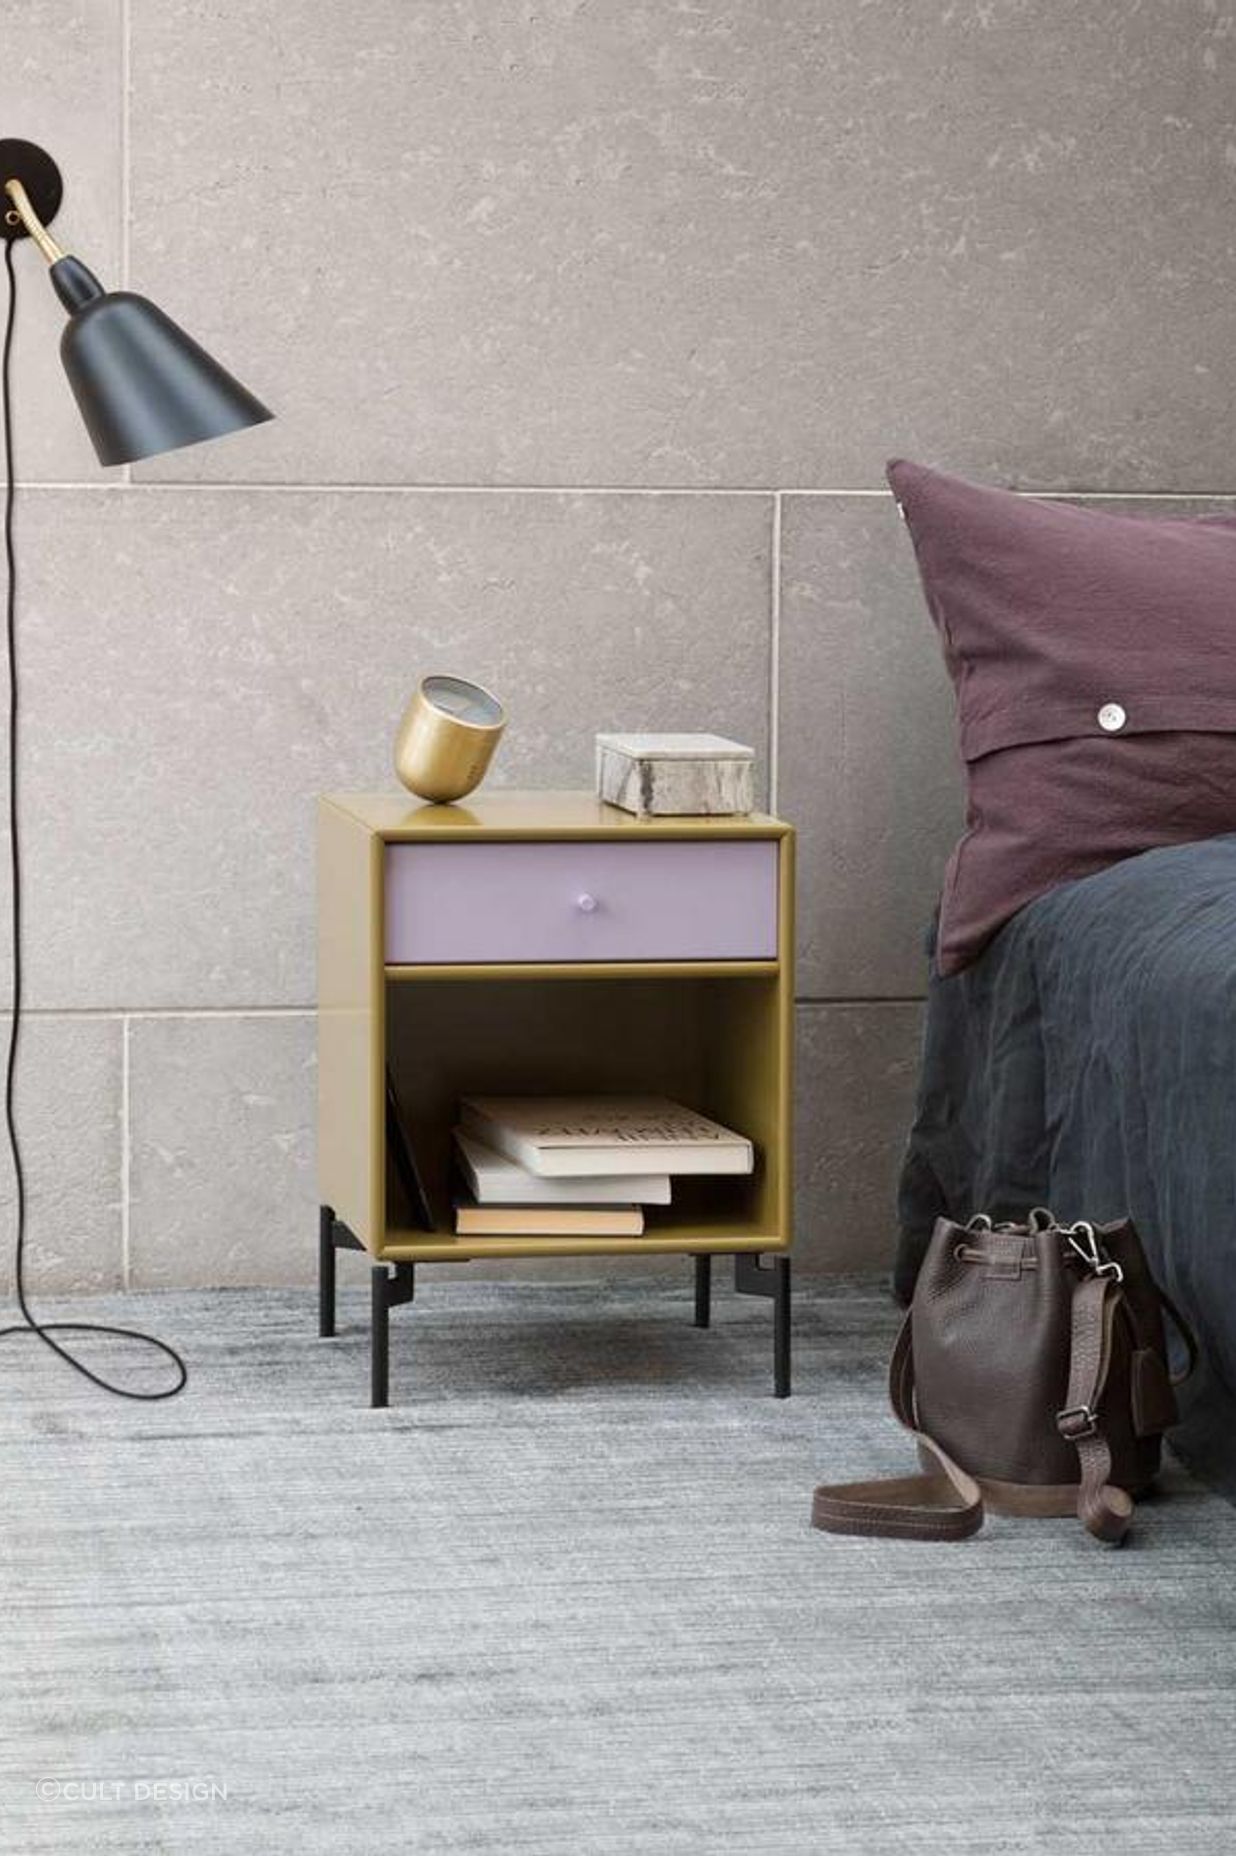 Some bedside tables, like this Dream Bedside Unit, have ample storage space.